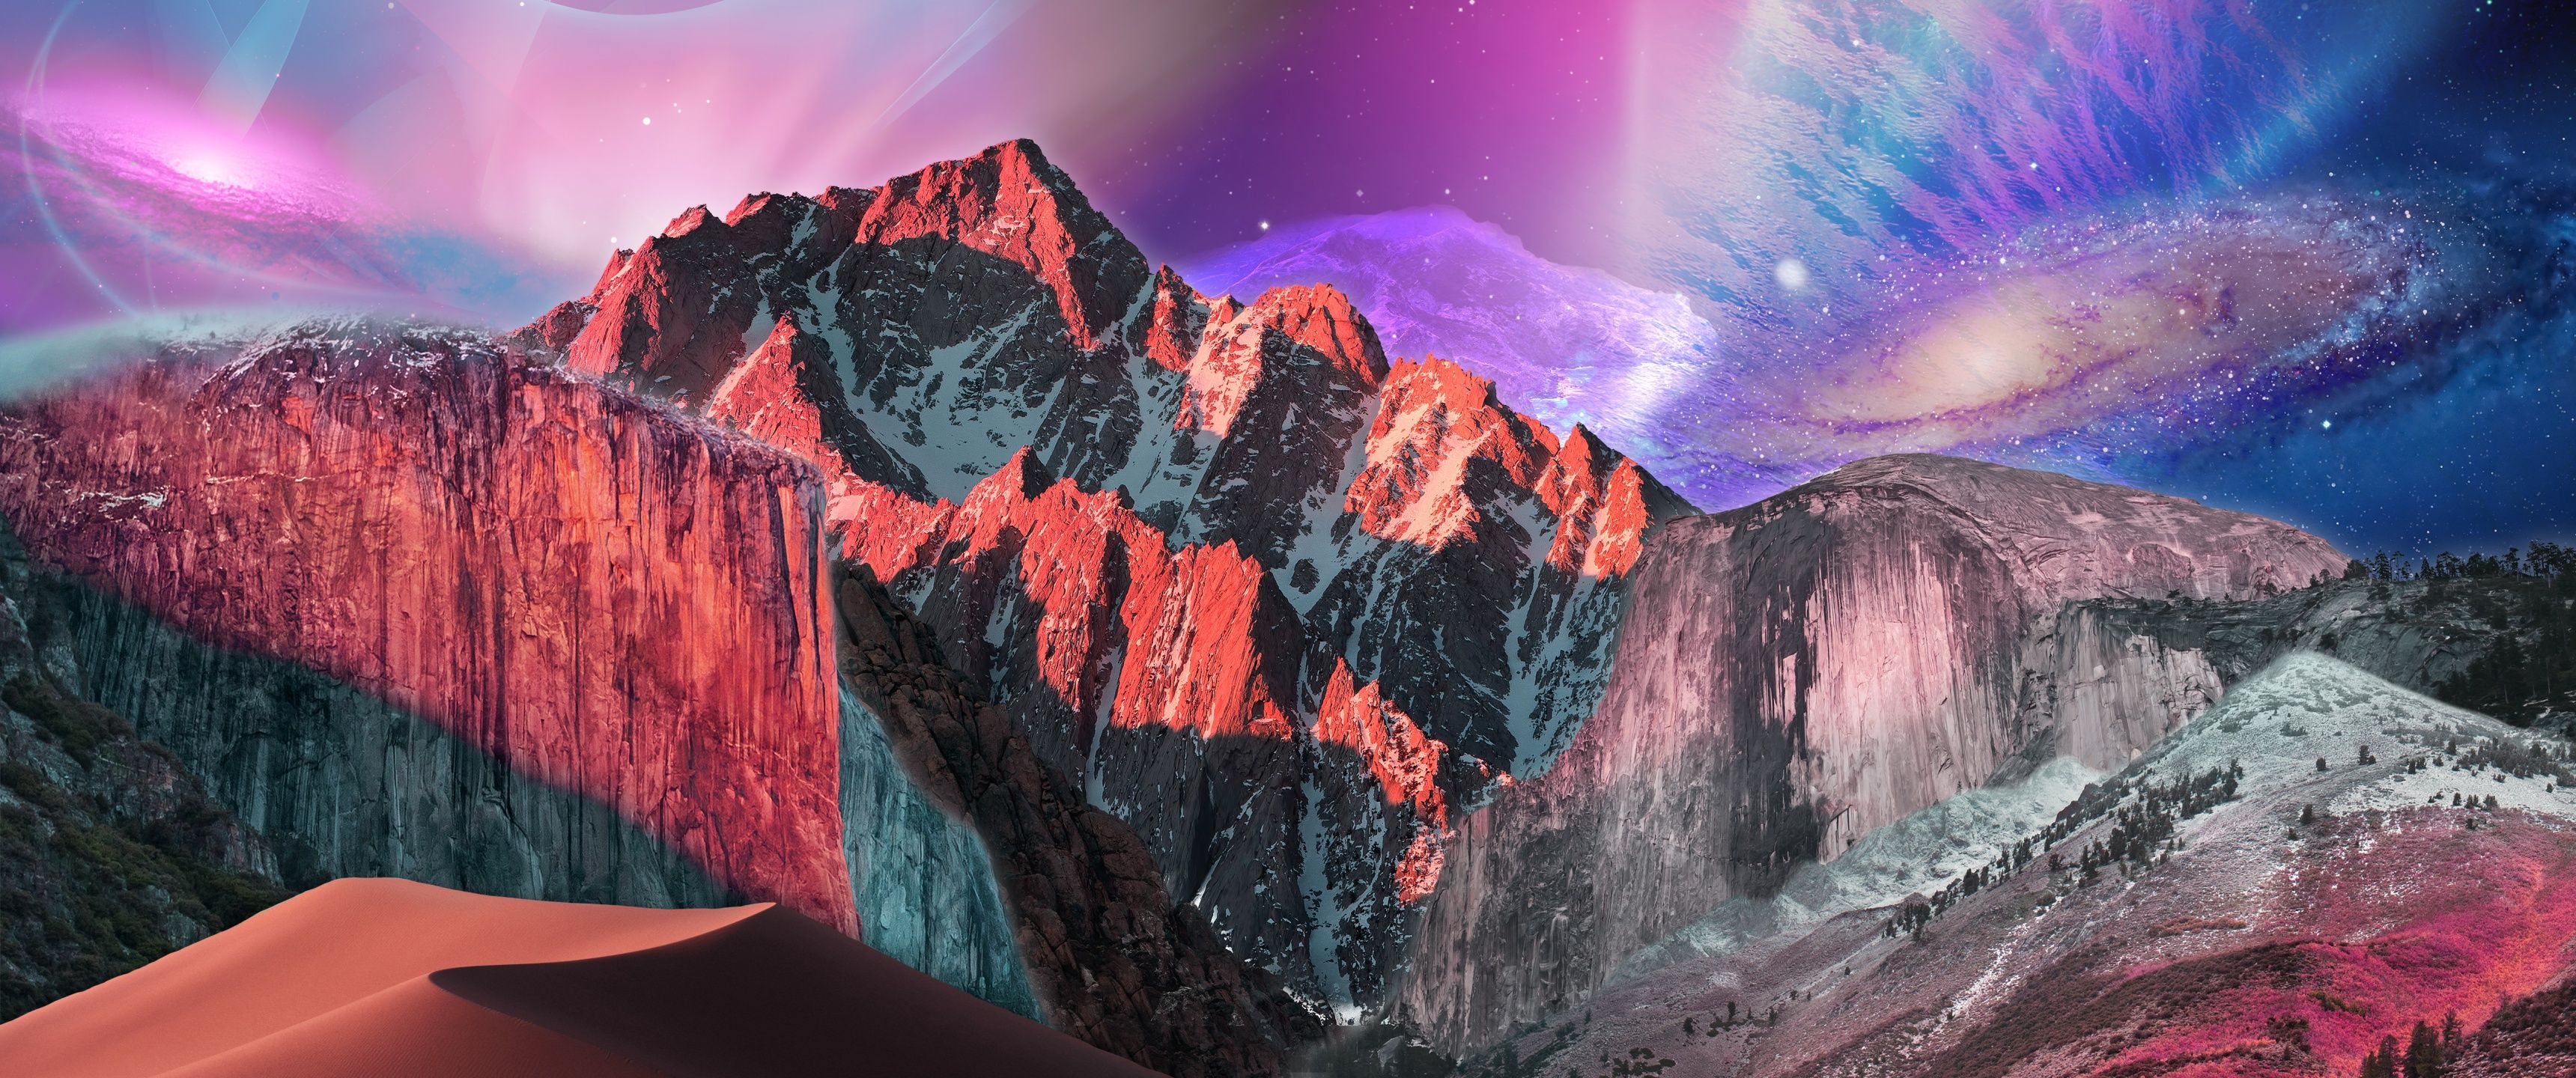 A mountain with some colorful clouds in the background - 3440x1440